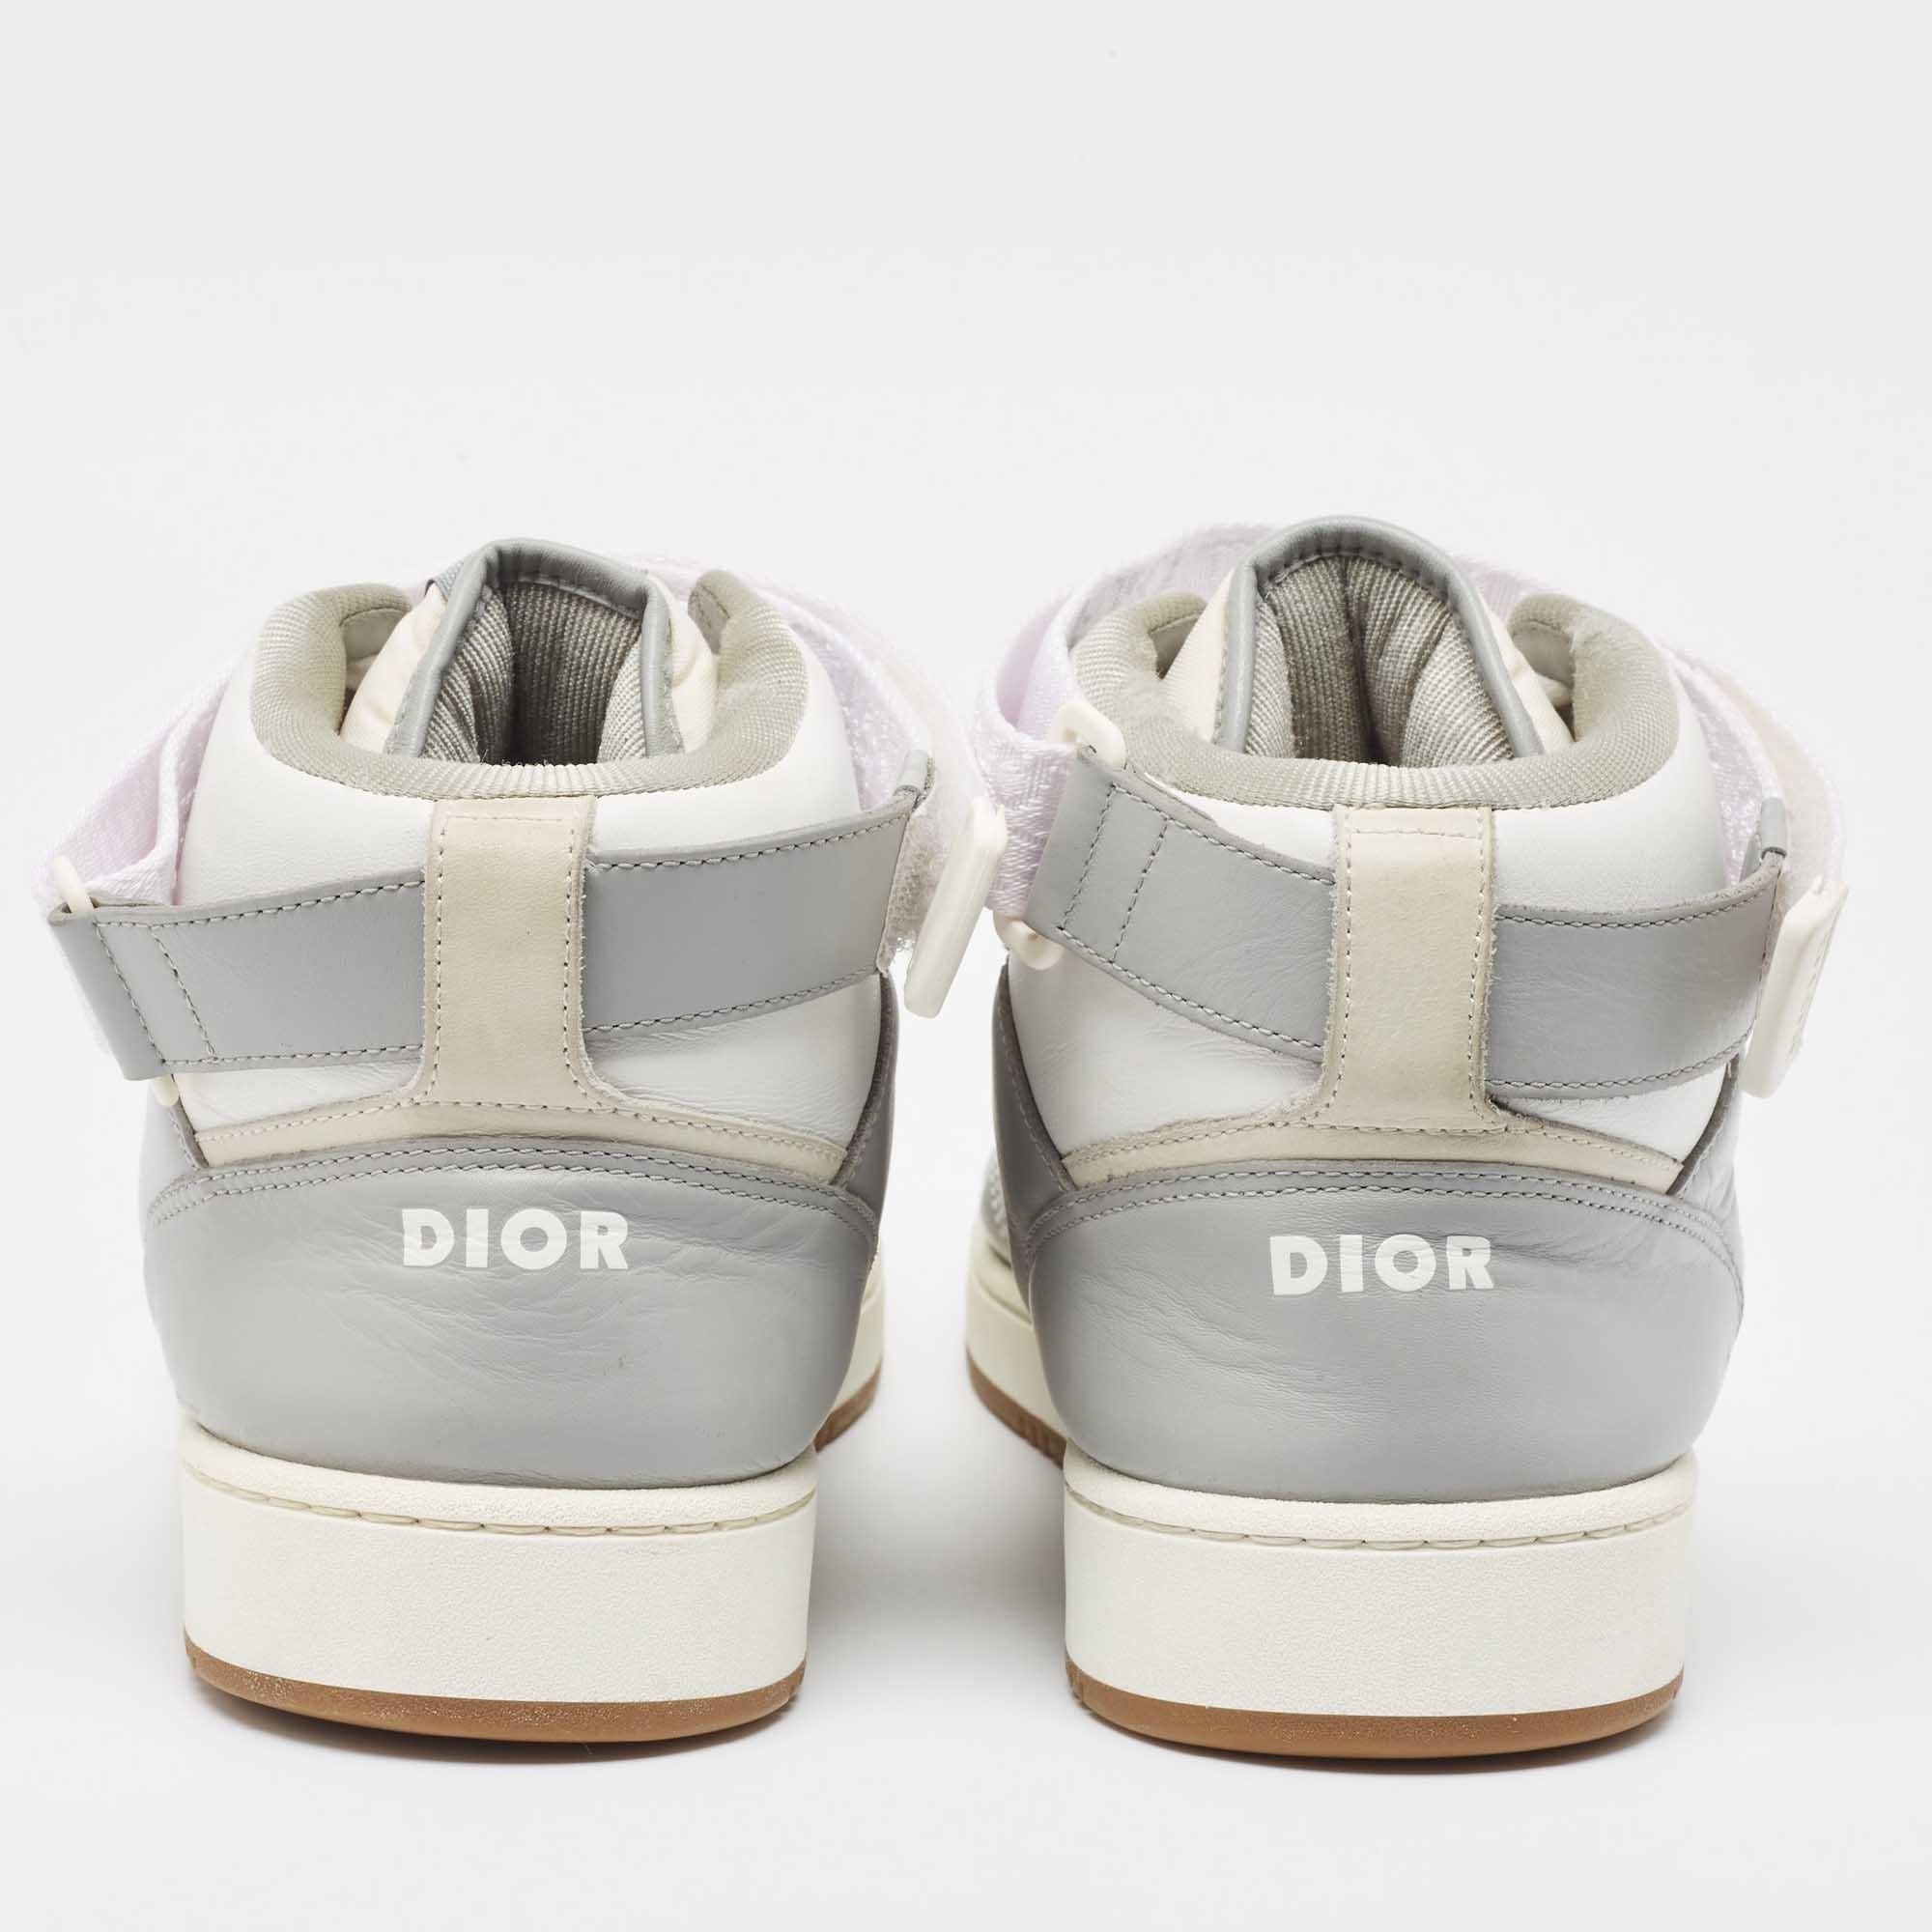 DIOR Grey/White Leather and Oblique Jacquard B27 High Top Sneakers Size 47 1